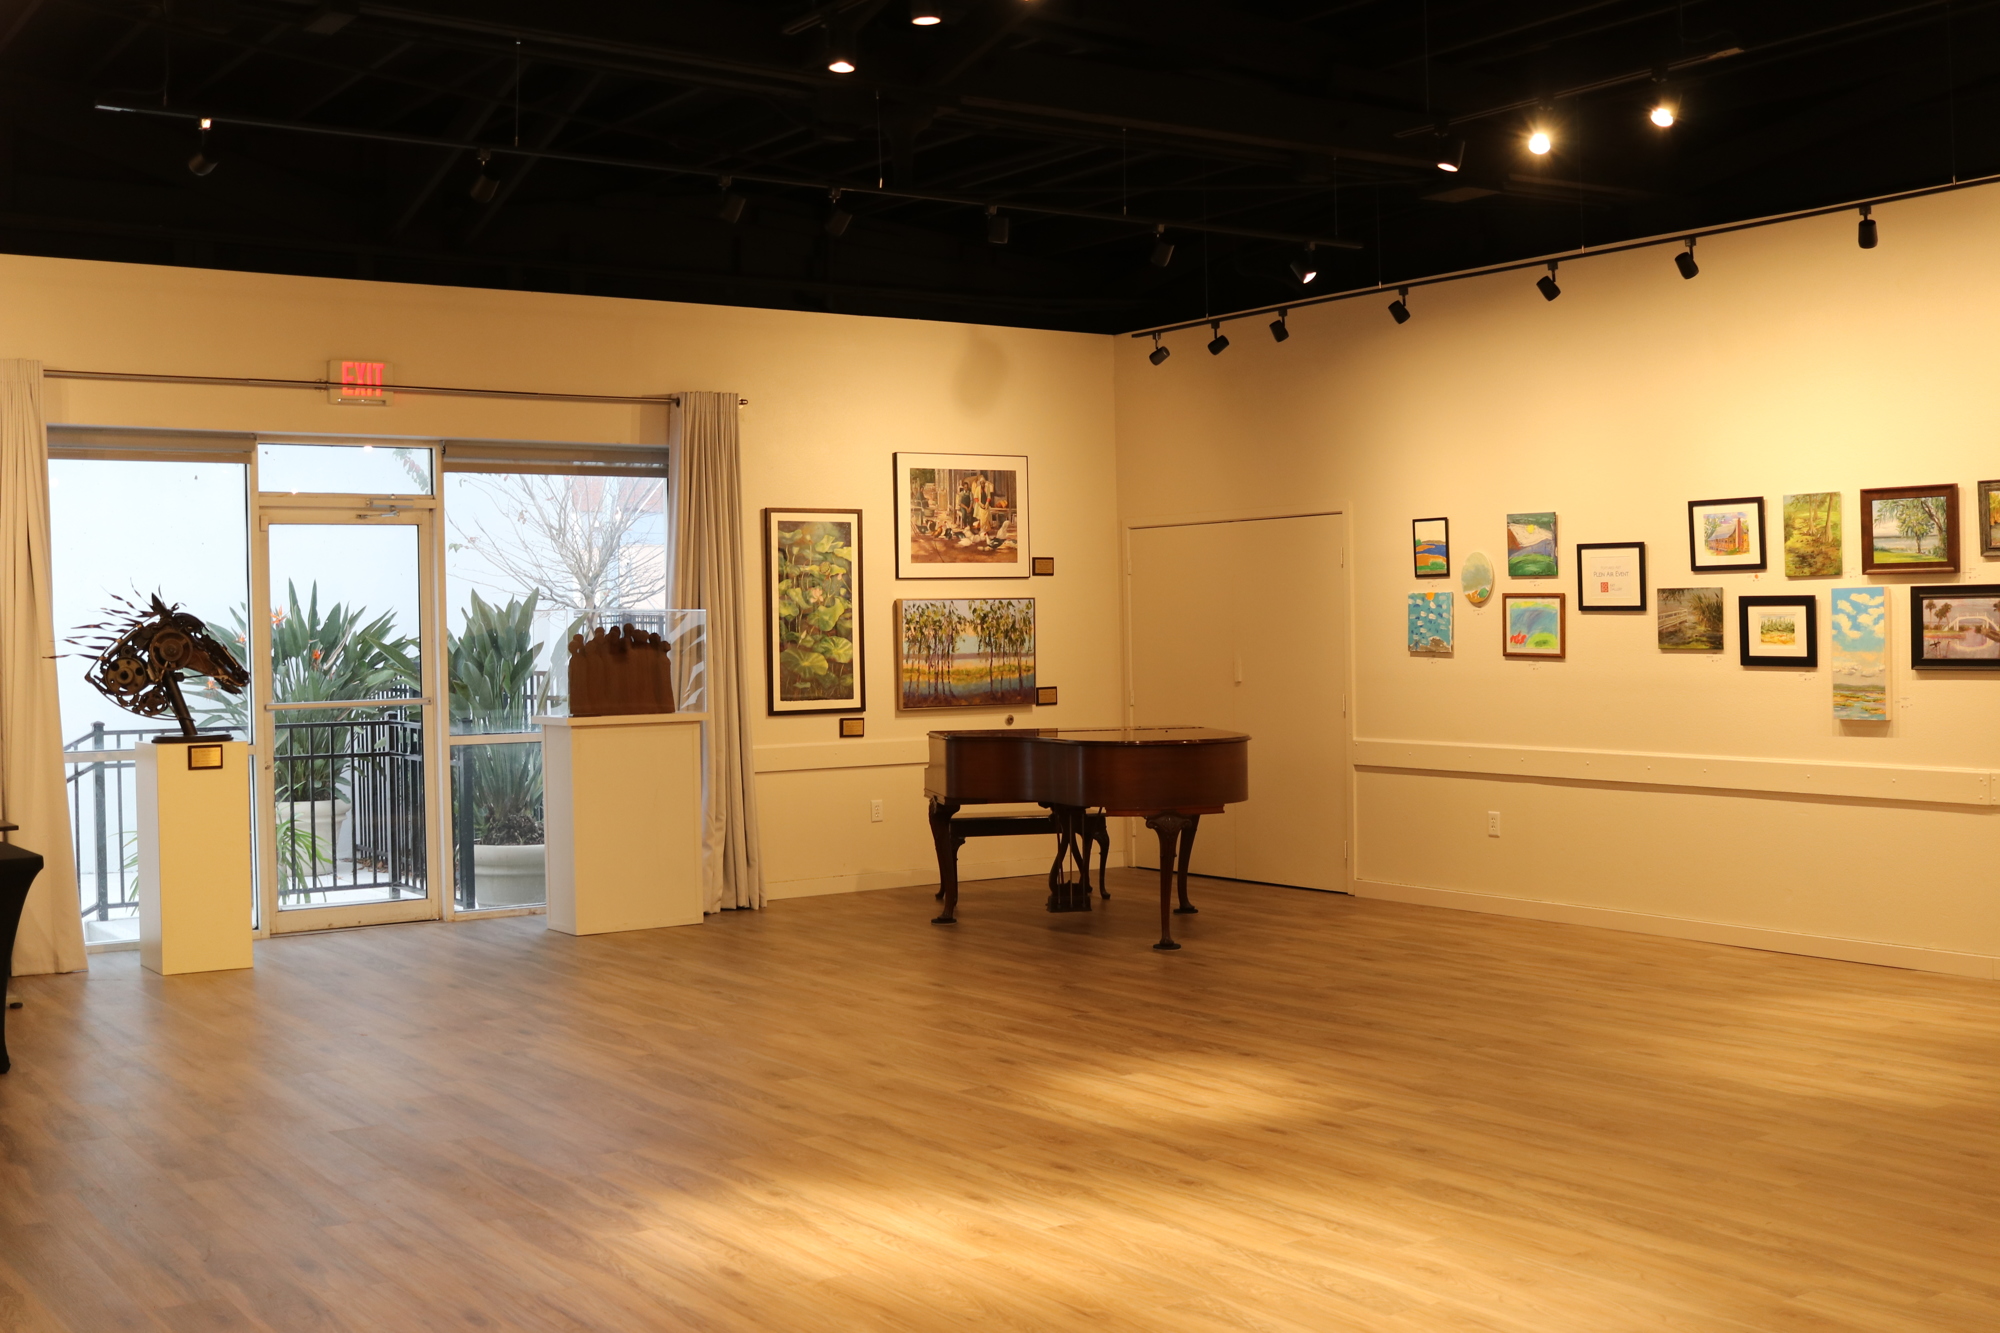 Improvements to the back room of the gallery include raising the ceiling, and installing new flooring and lighting.